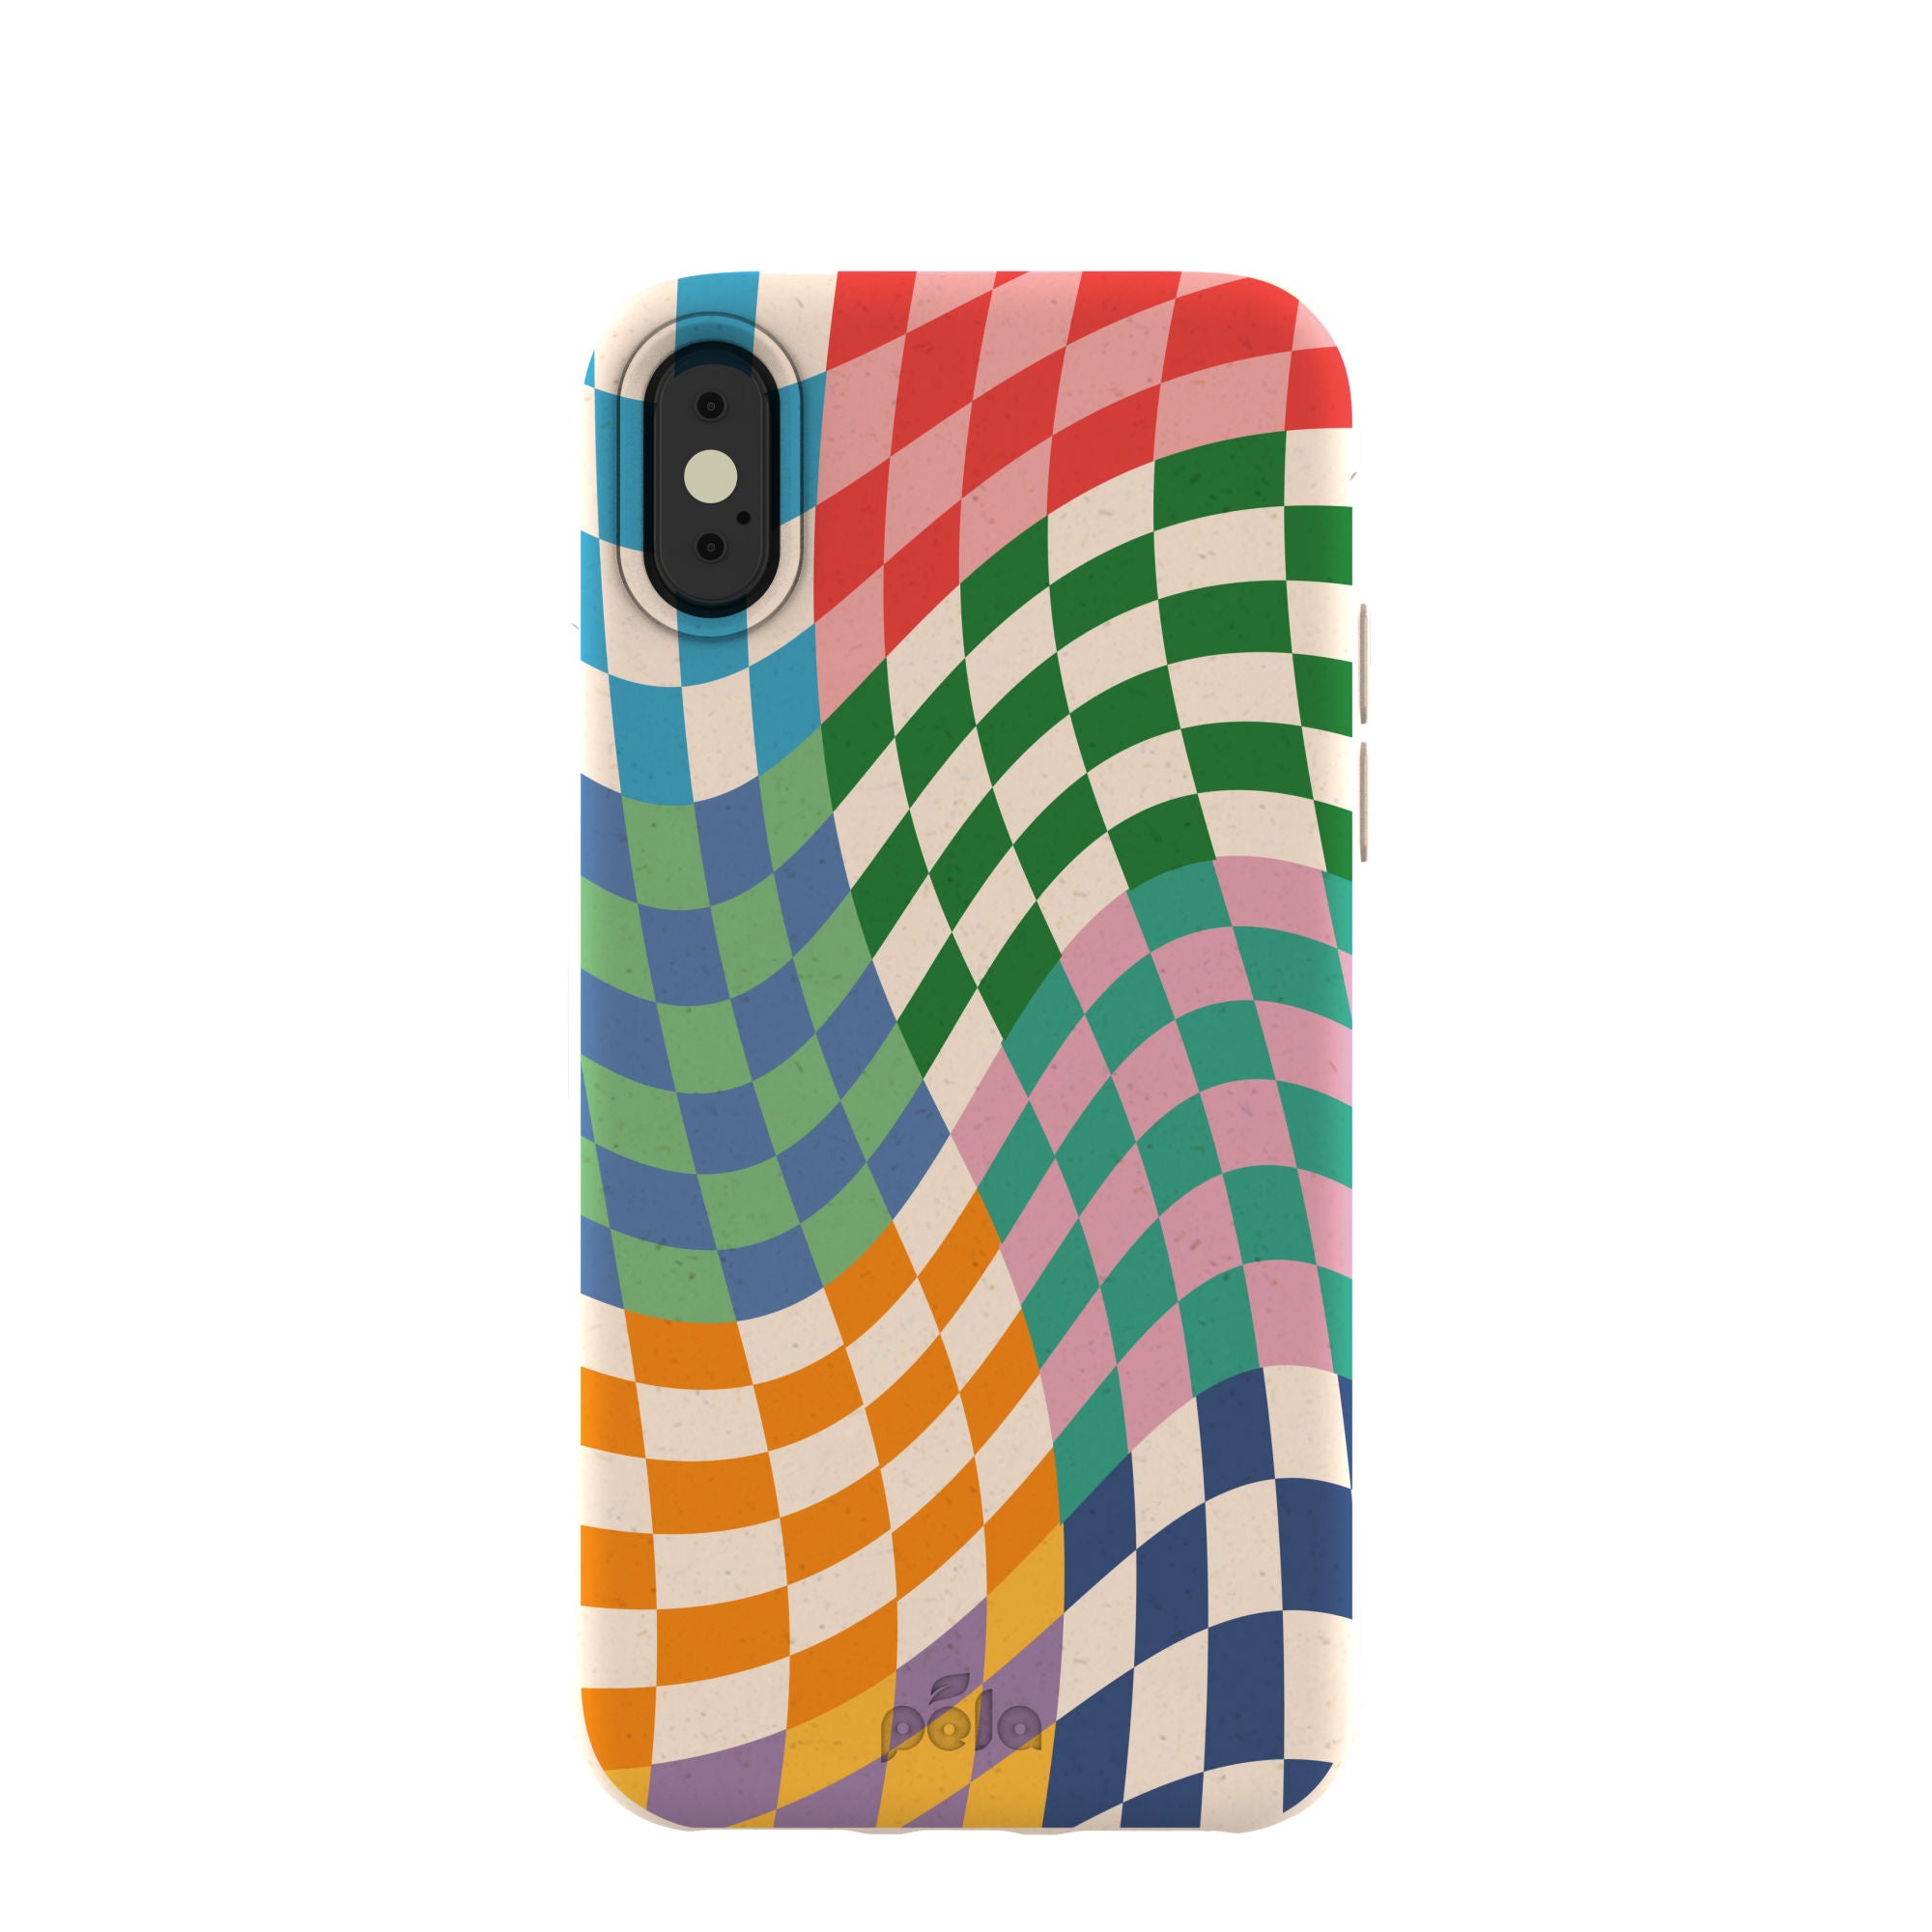 Light Green Checkered Phone Case iPhone Case